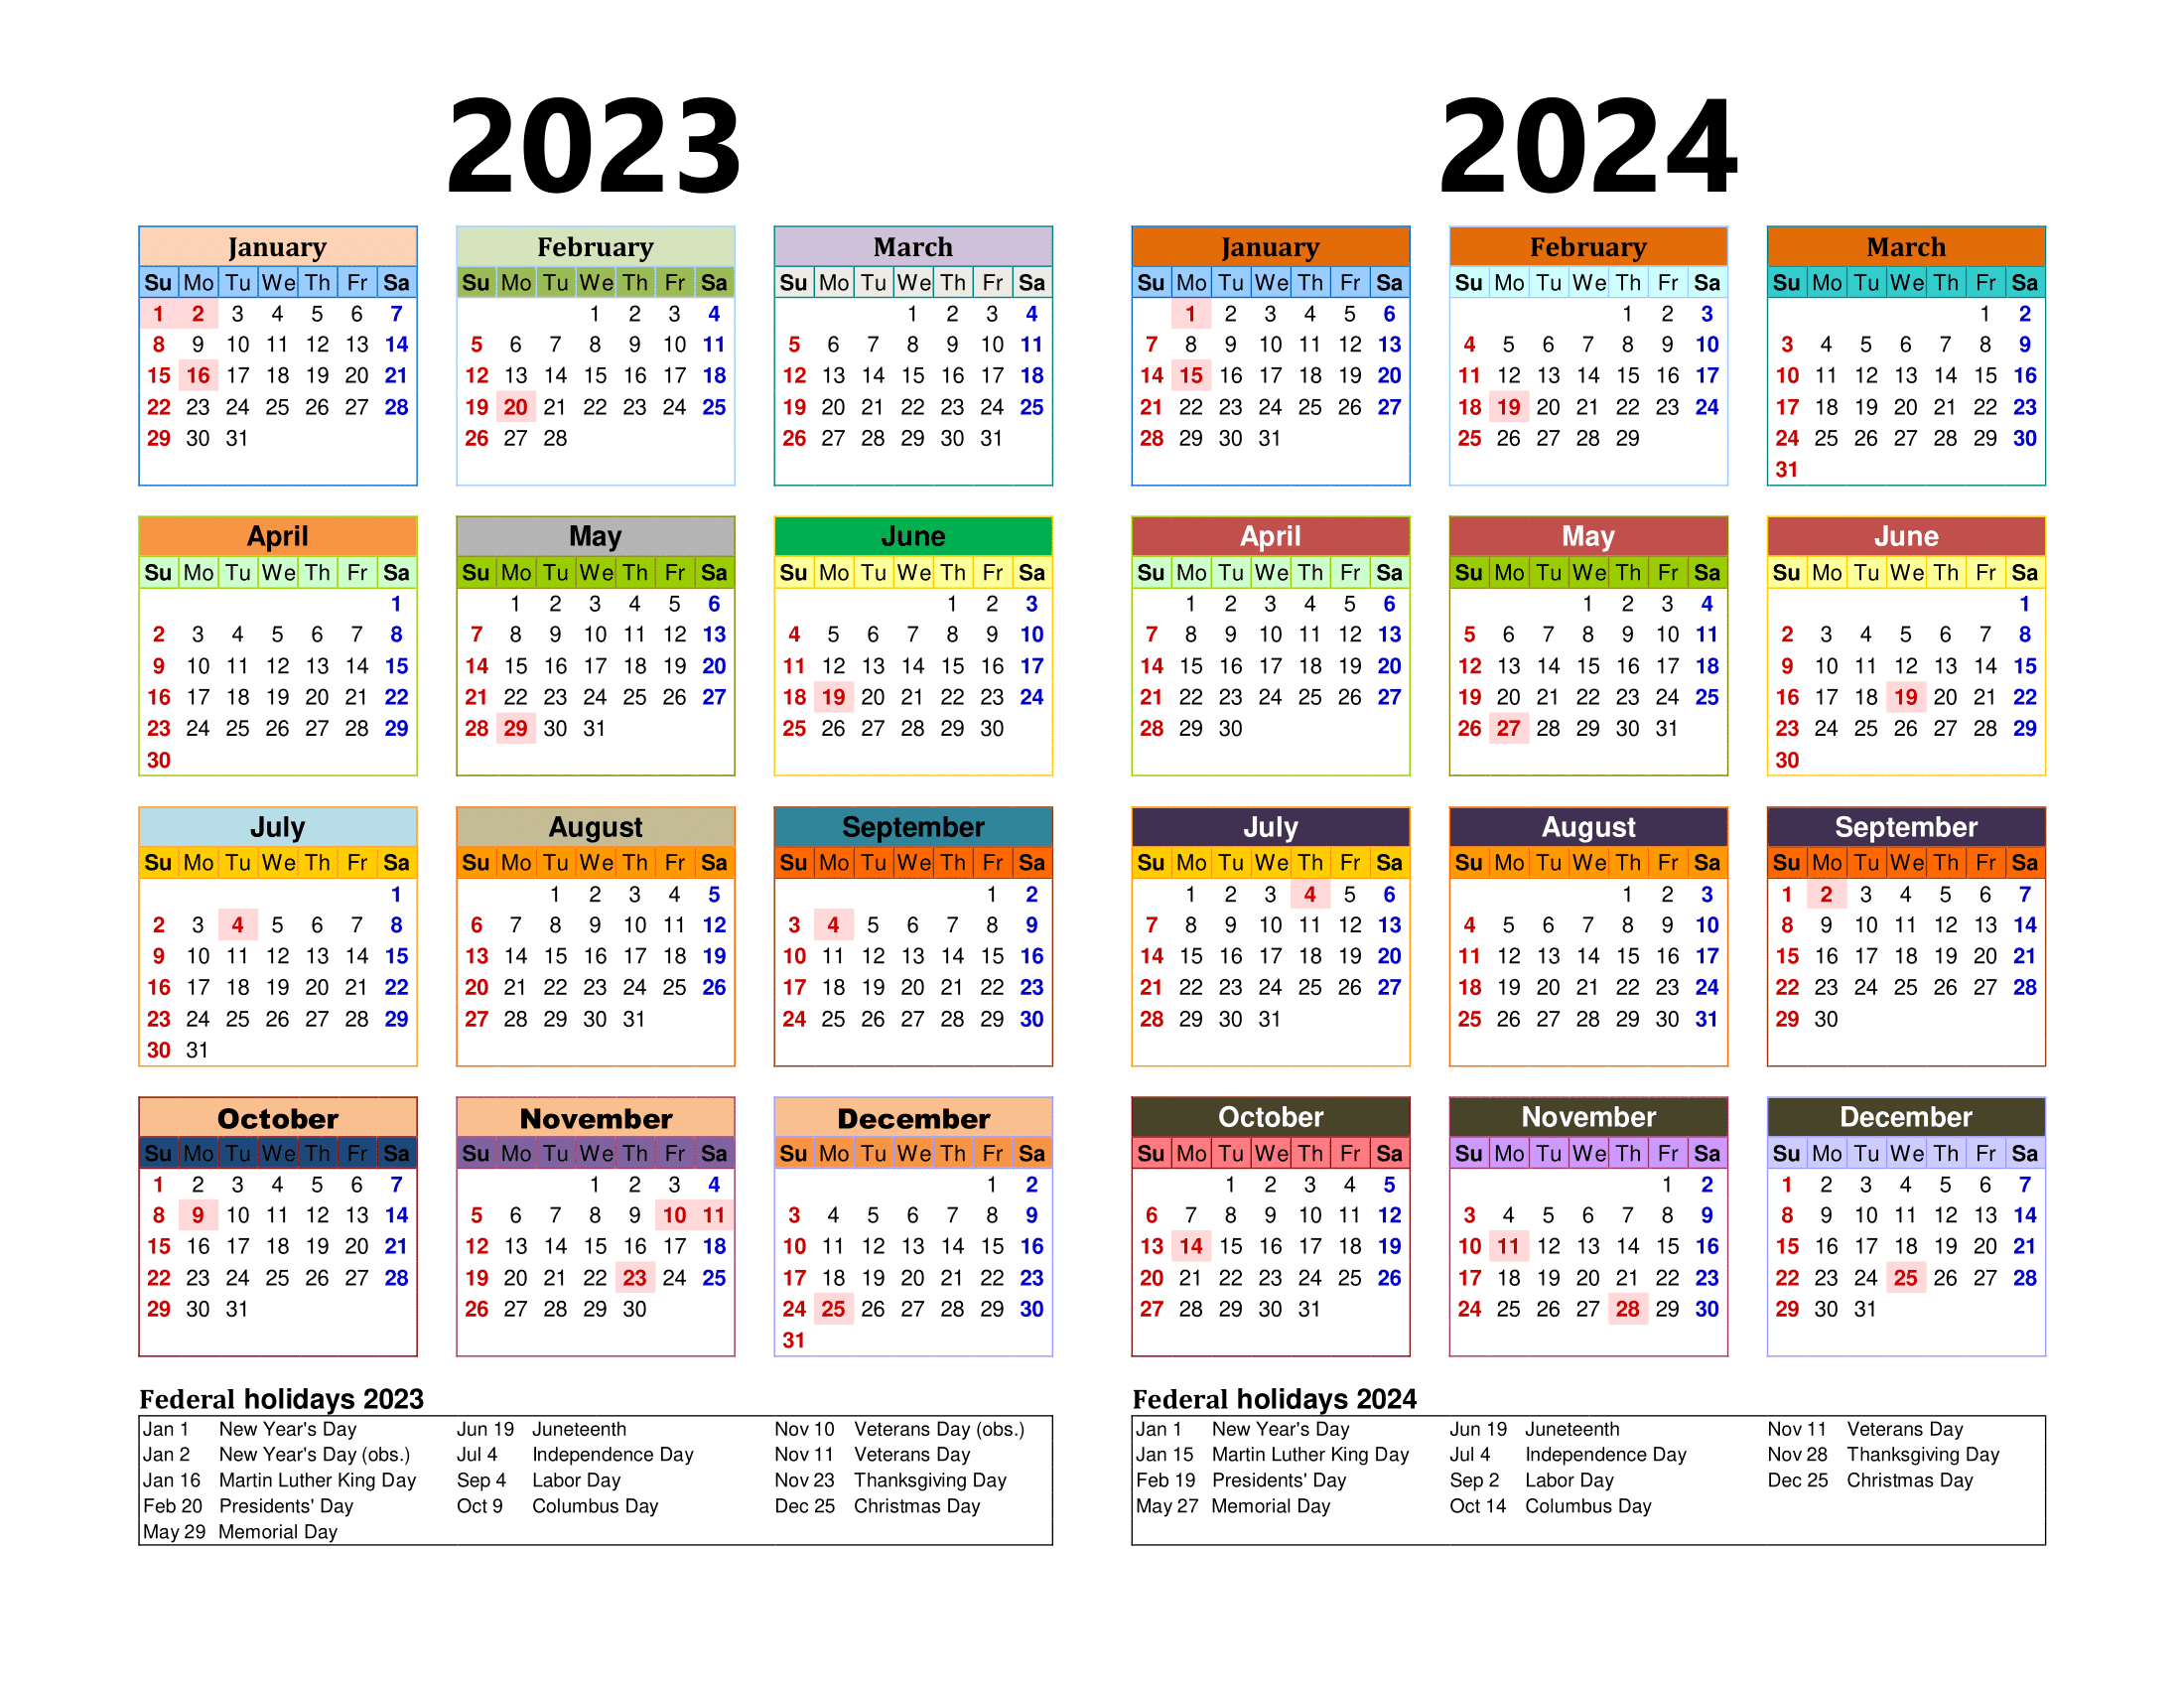 Free Printable Two Year Calendar Templates For 2023 And 2024 In Pdf for 2023 2024 Printable Calendar